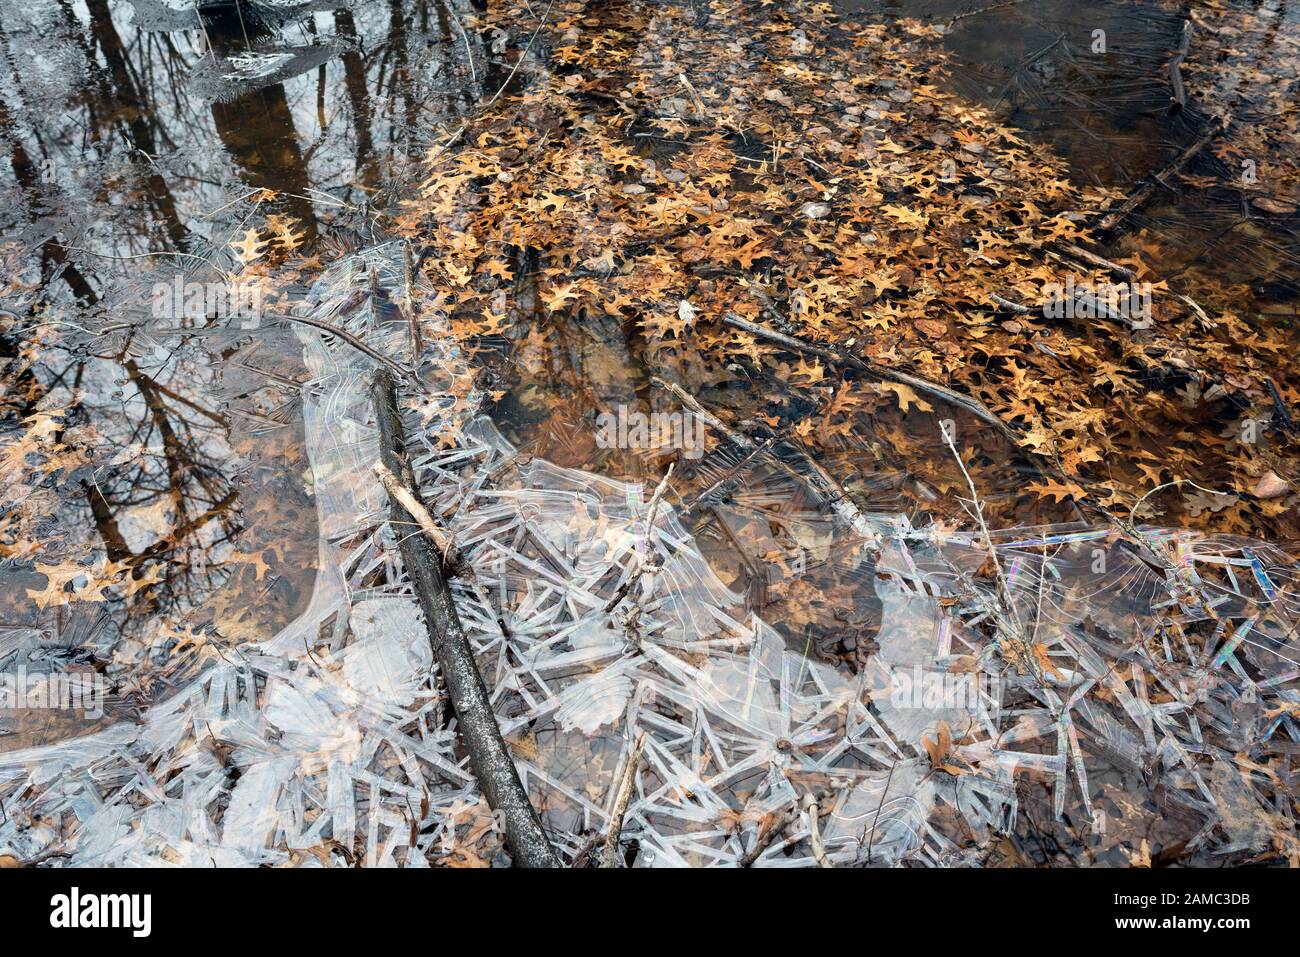 Unique patterns in ice on a partially frozen pond with fallen oak leaves,early winter. Stock Photo